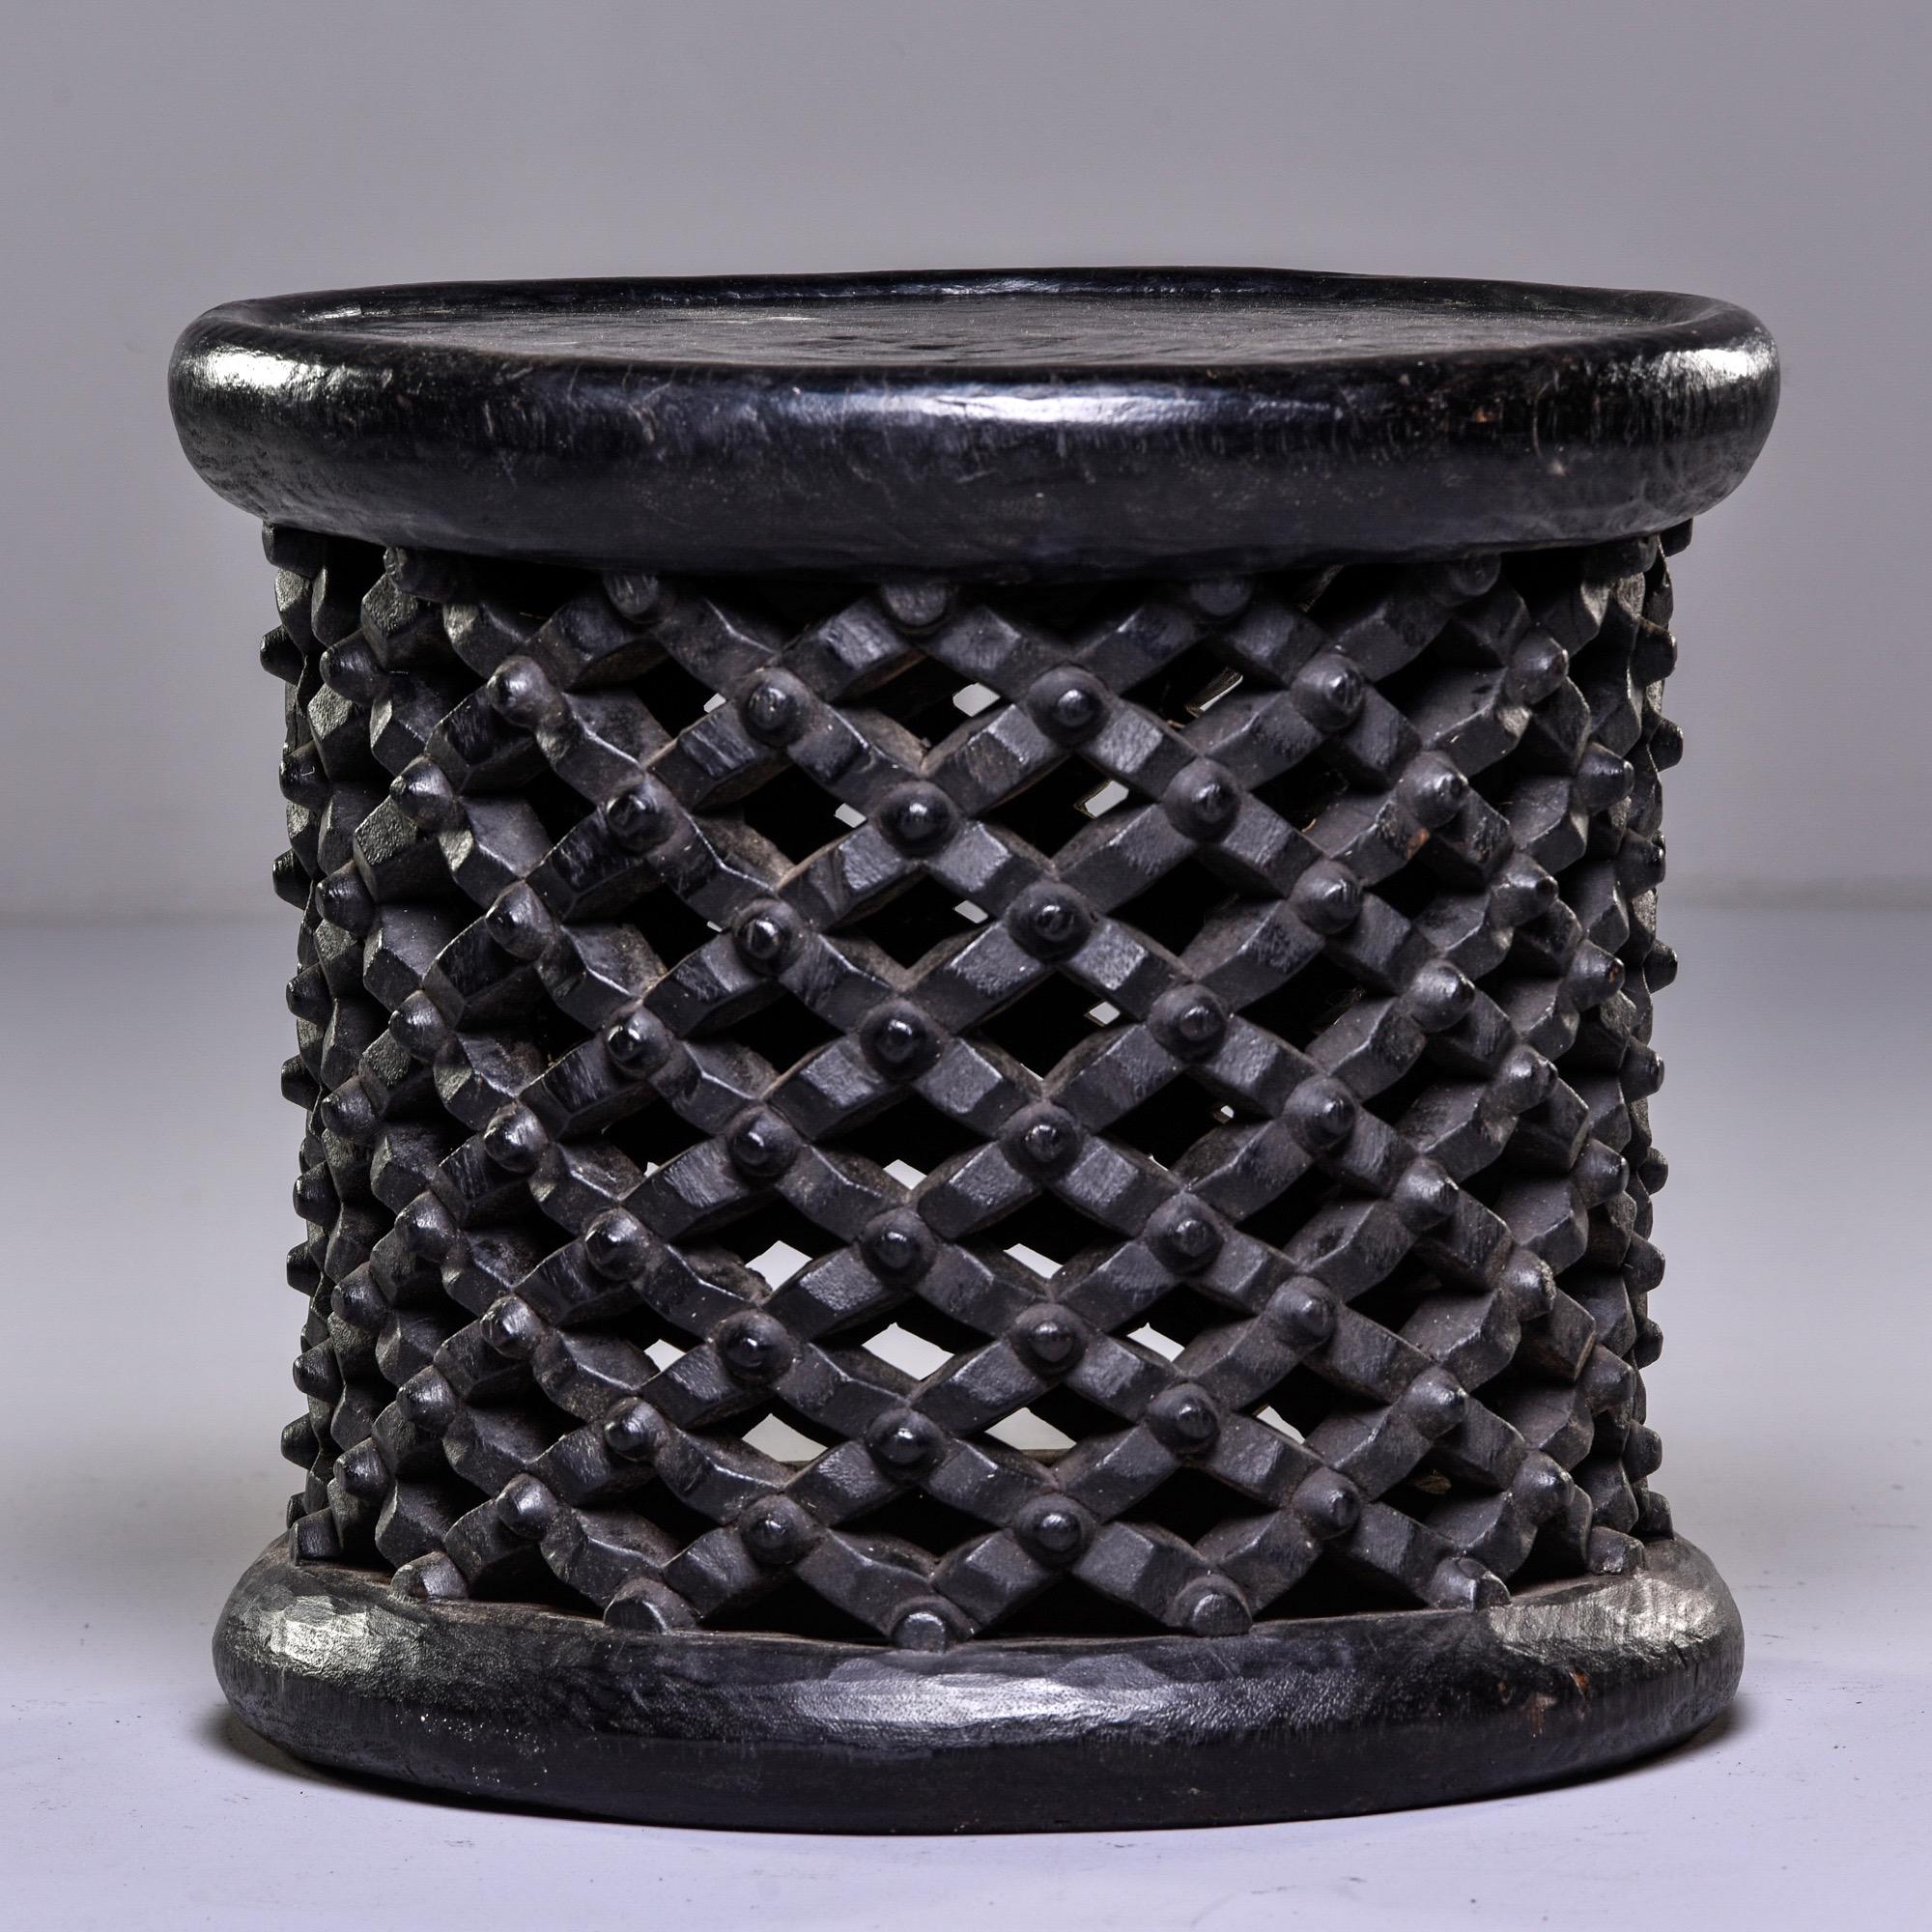 Round dark wood stool or side table, circa 1980s. Hand carved by a artist in Cameroon, this style is known as a spider stool because of its knobby web-like base. The Bamileke people see spiders as a link between the living and the dead and use